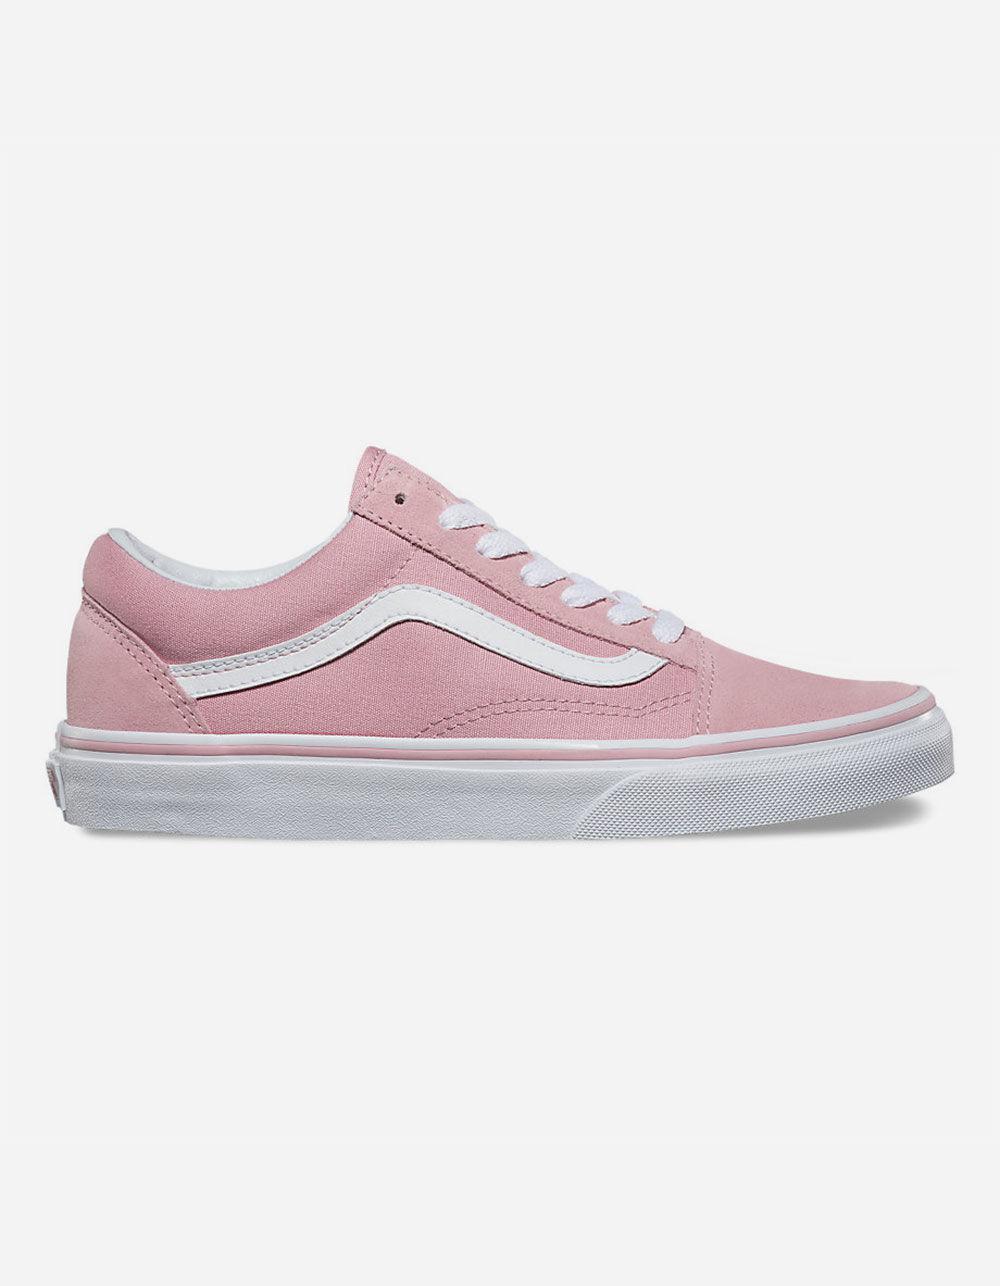 light pink and white vans